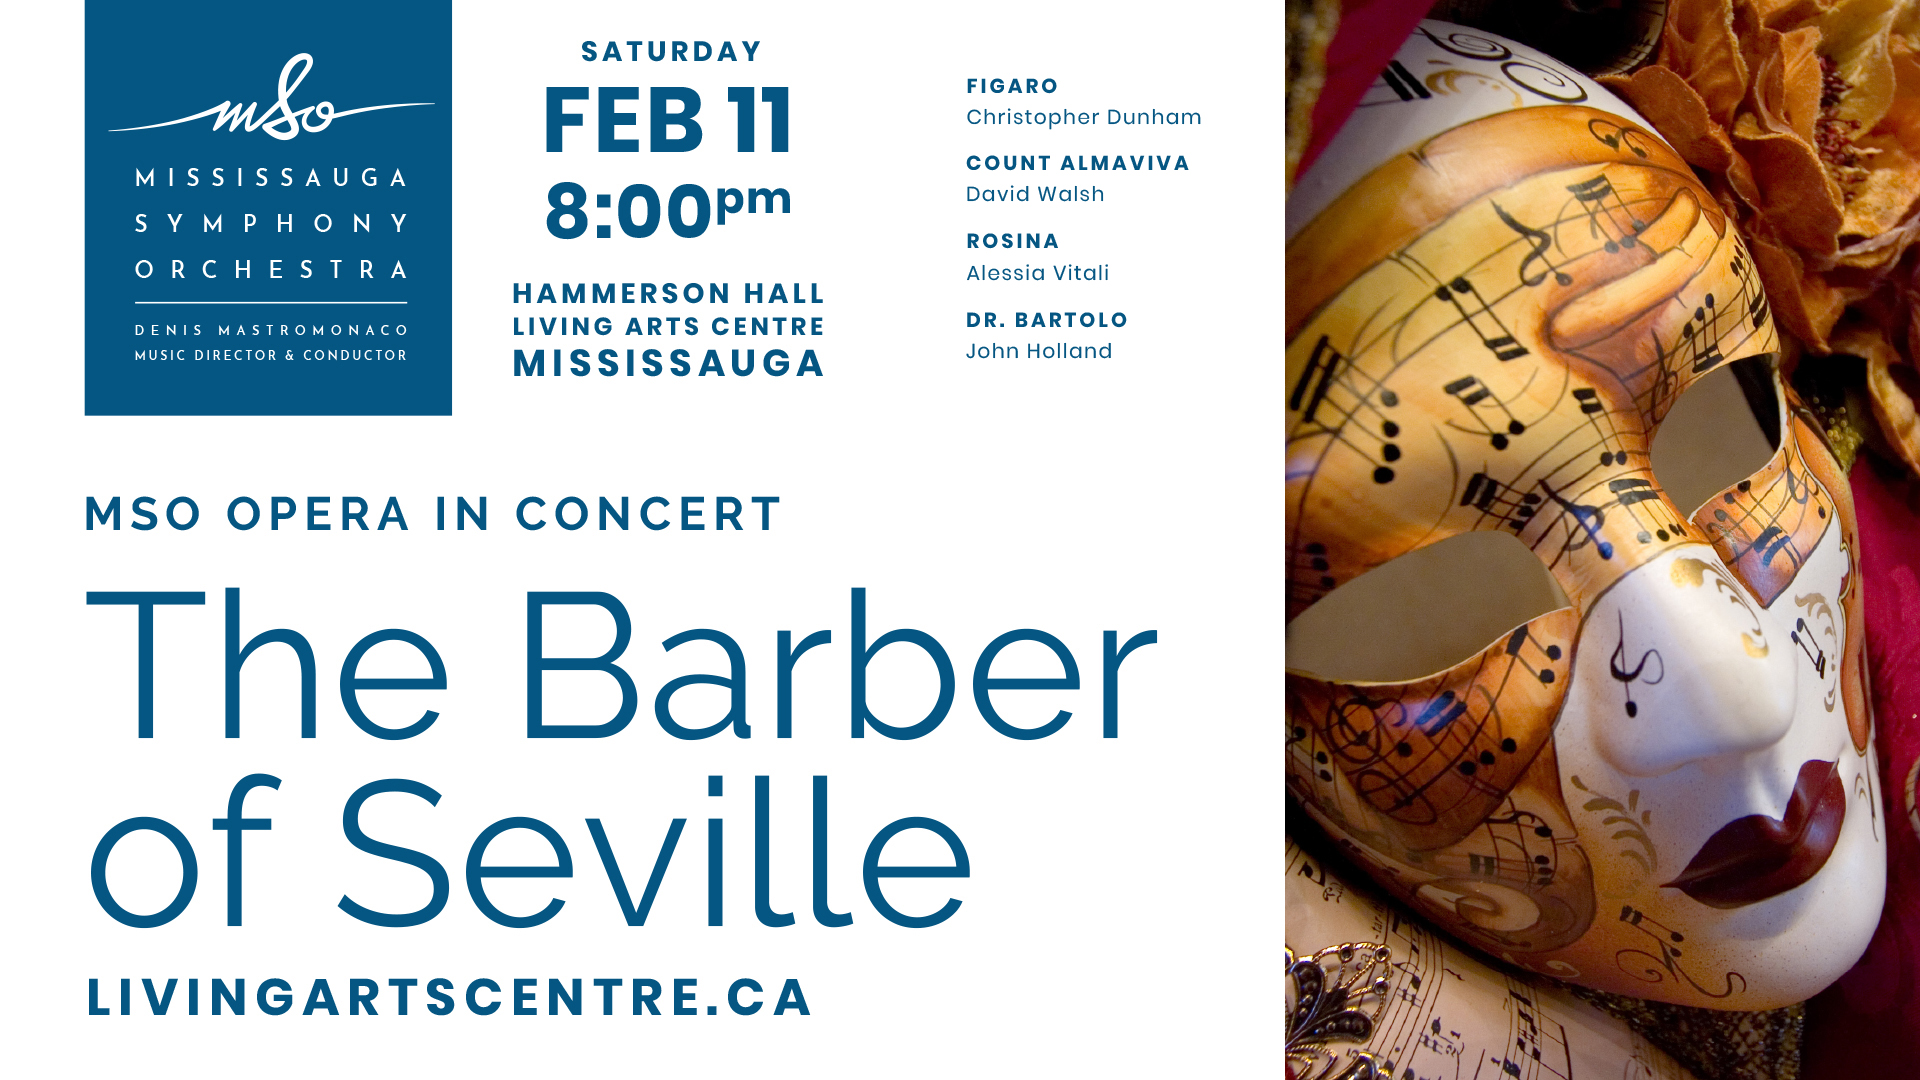 The Barber of Seville – Meet the Cast